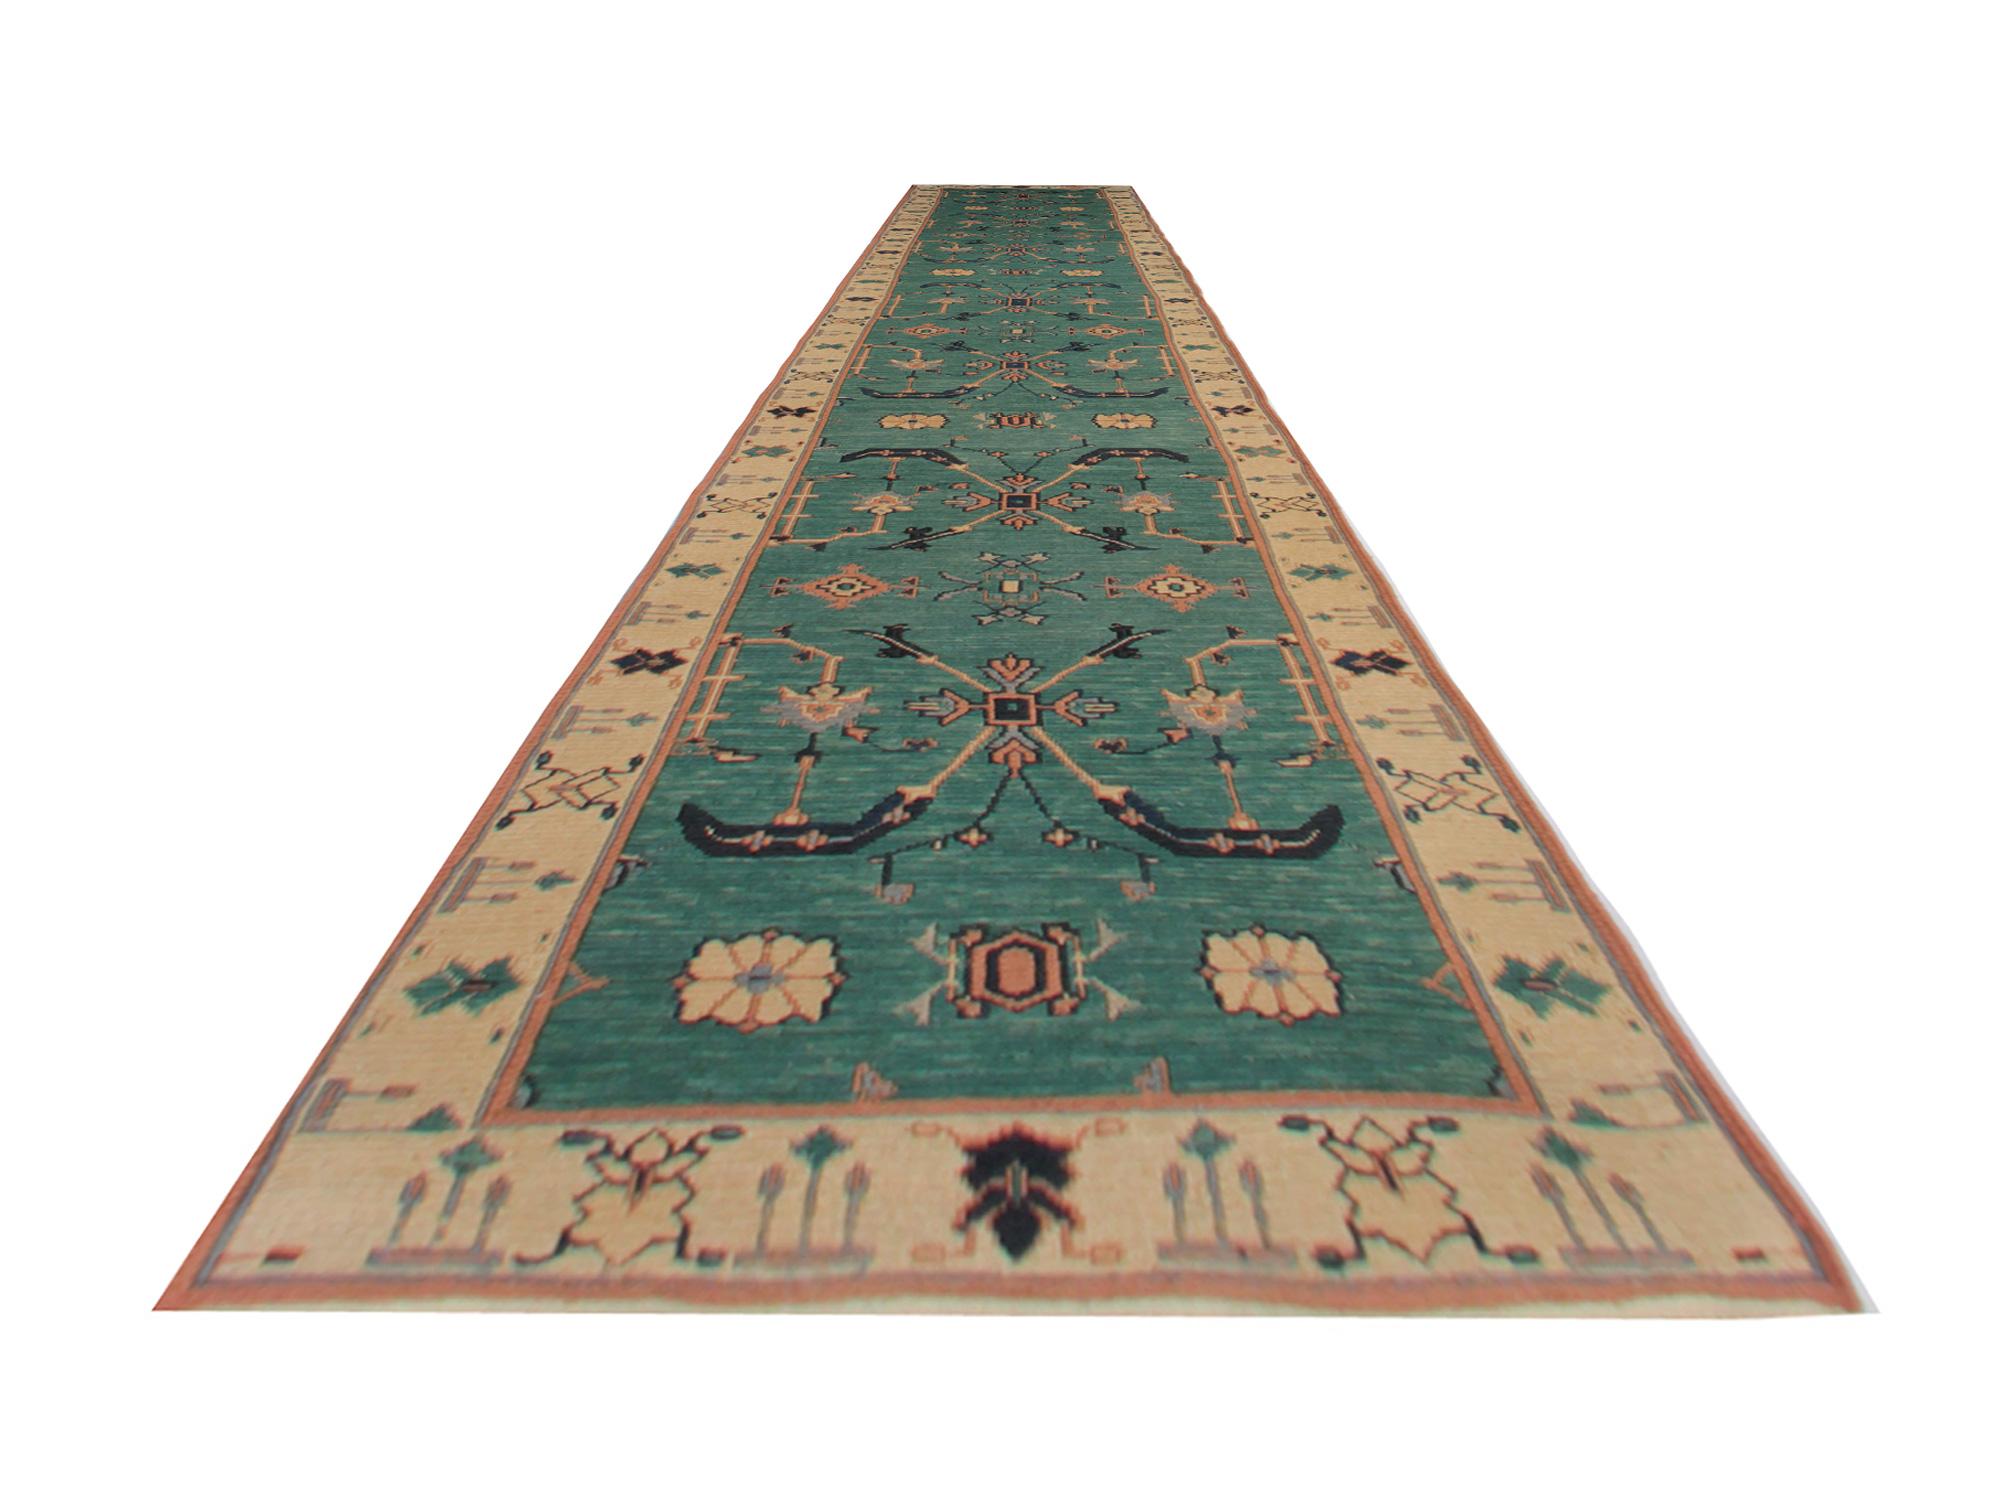 This is a Sumakh tribal rug features a green background with a repeating pattern all-over the body of the woven rug. The green rug is a flat-weave rug, woven with the finest quality wool and cotton. The handmade carpet rug has pink, yellow, khaki